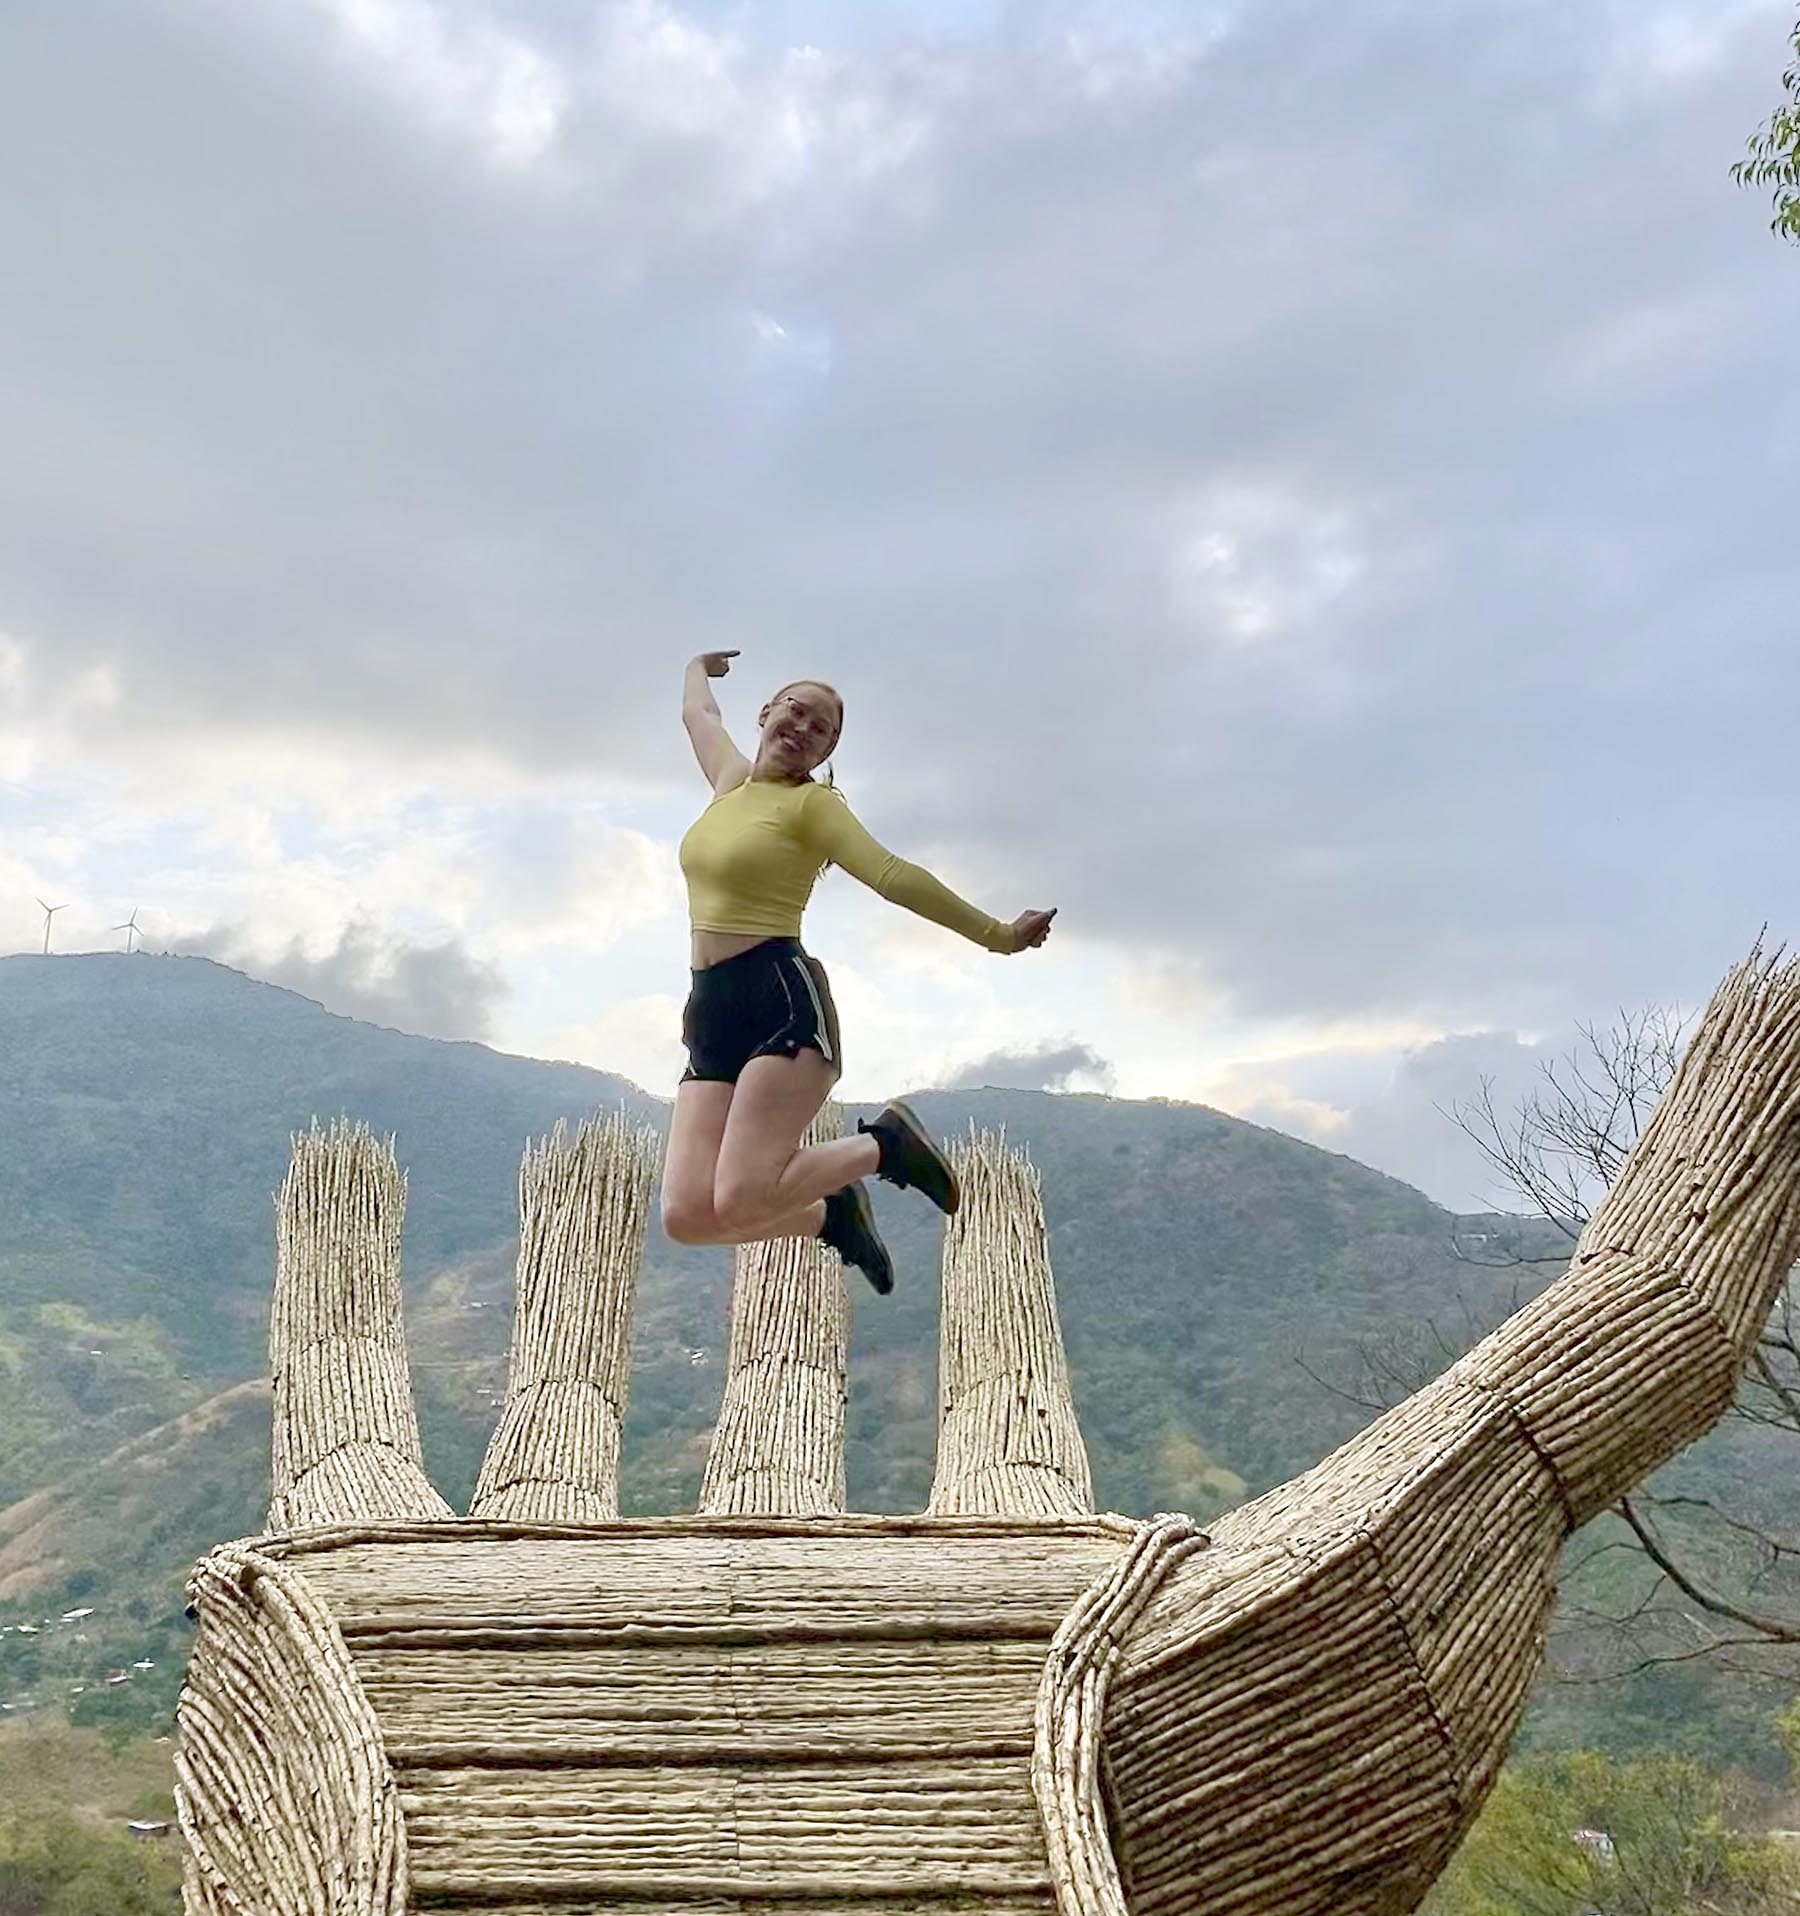 Ashley Hipnar jumps in the air with the Costa Rican mountains in the background